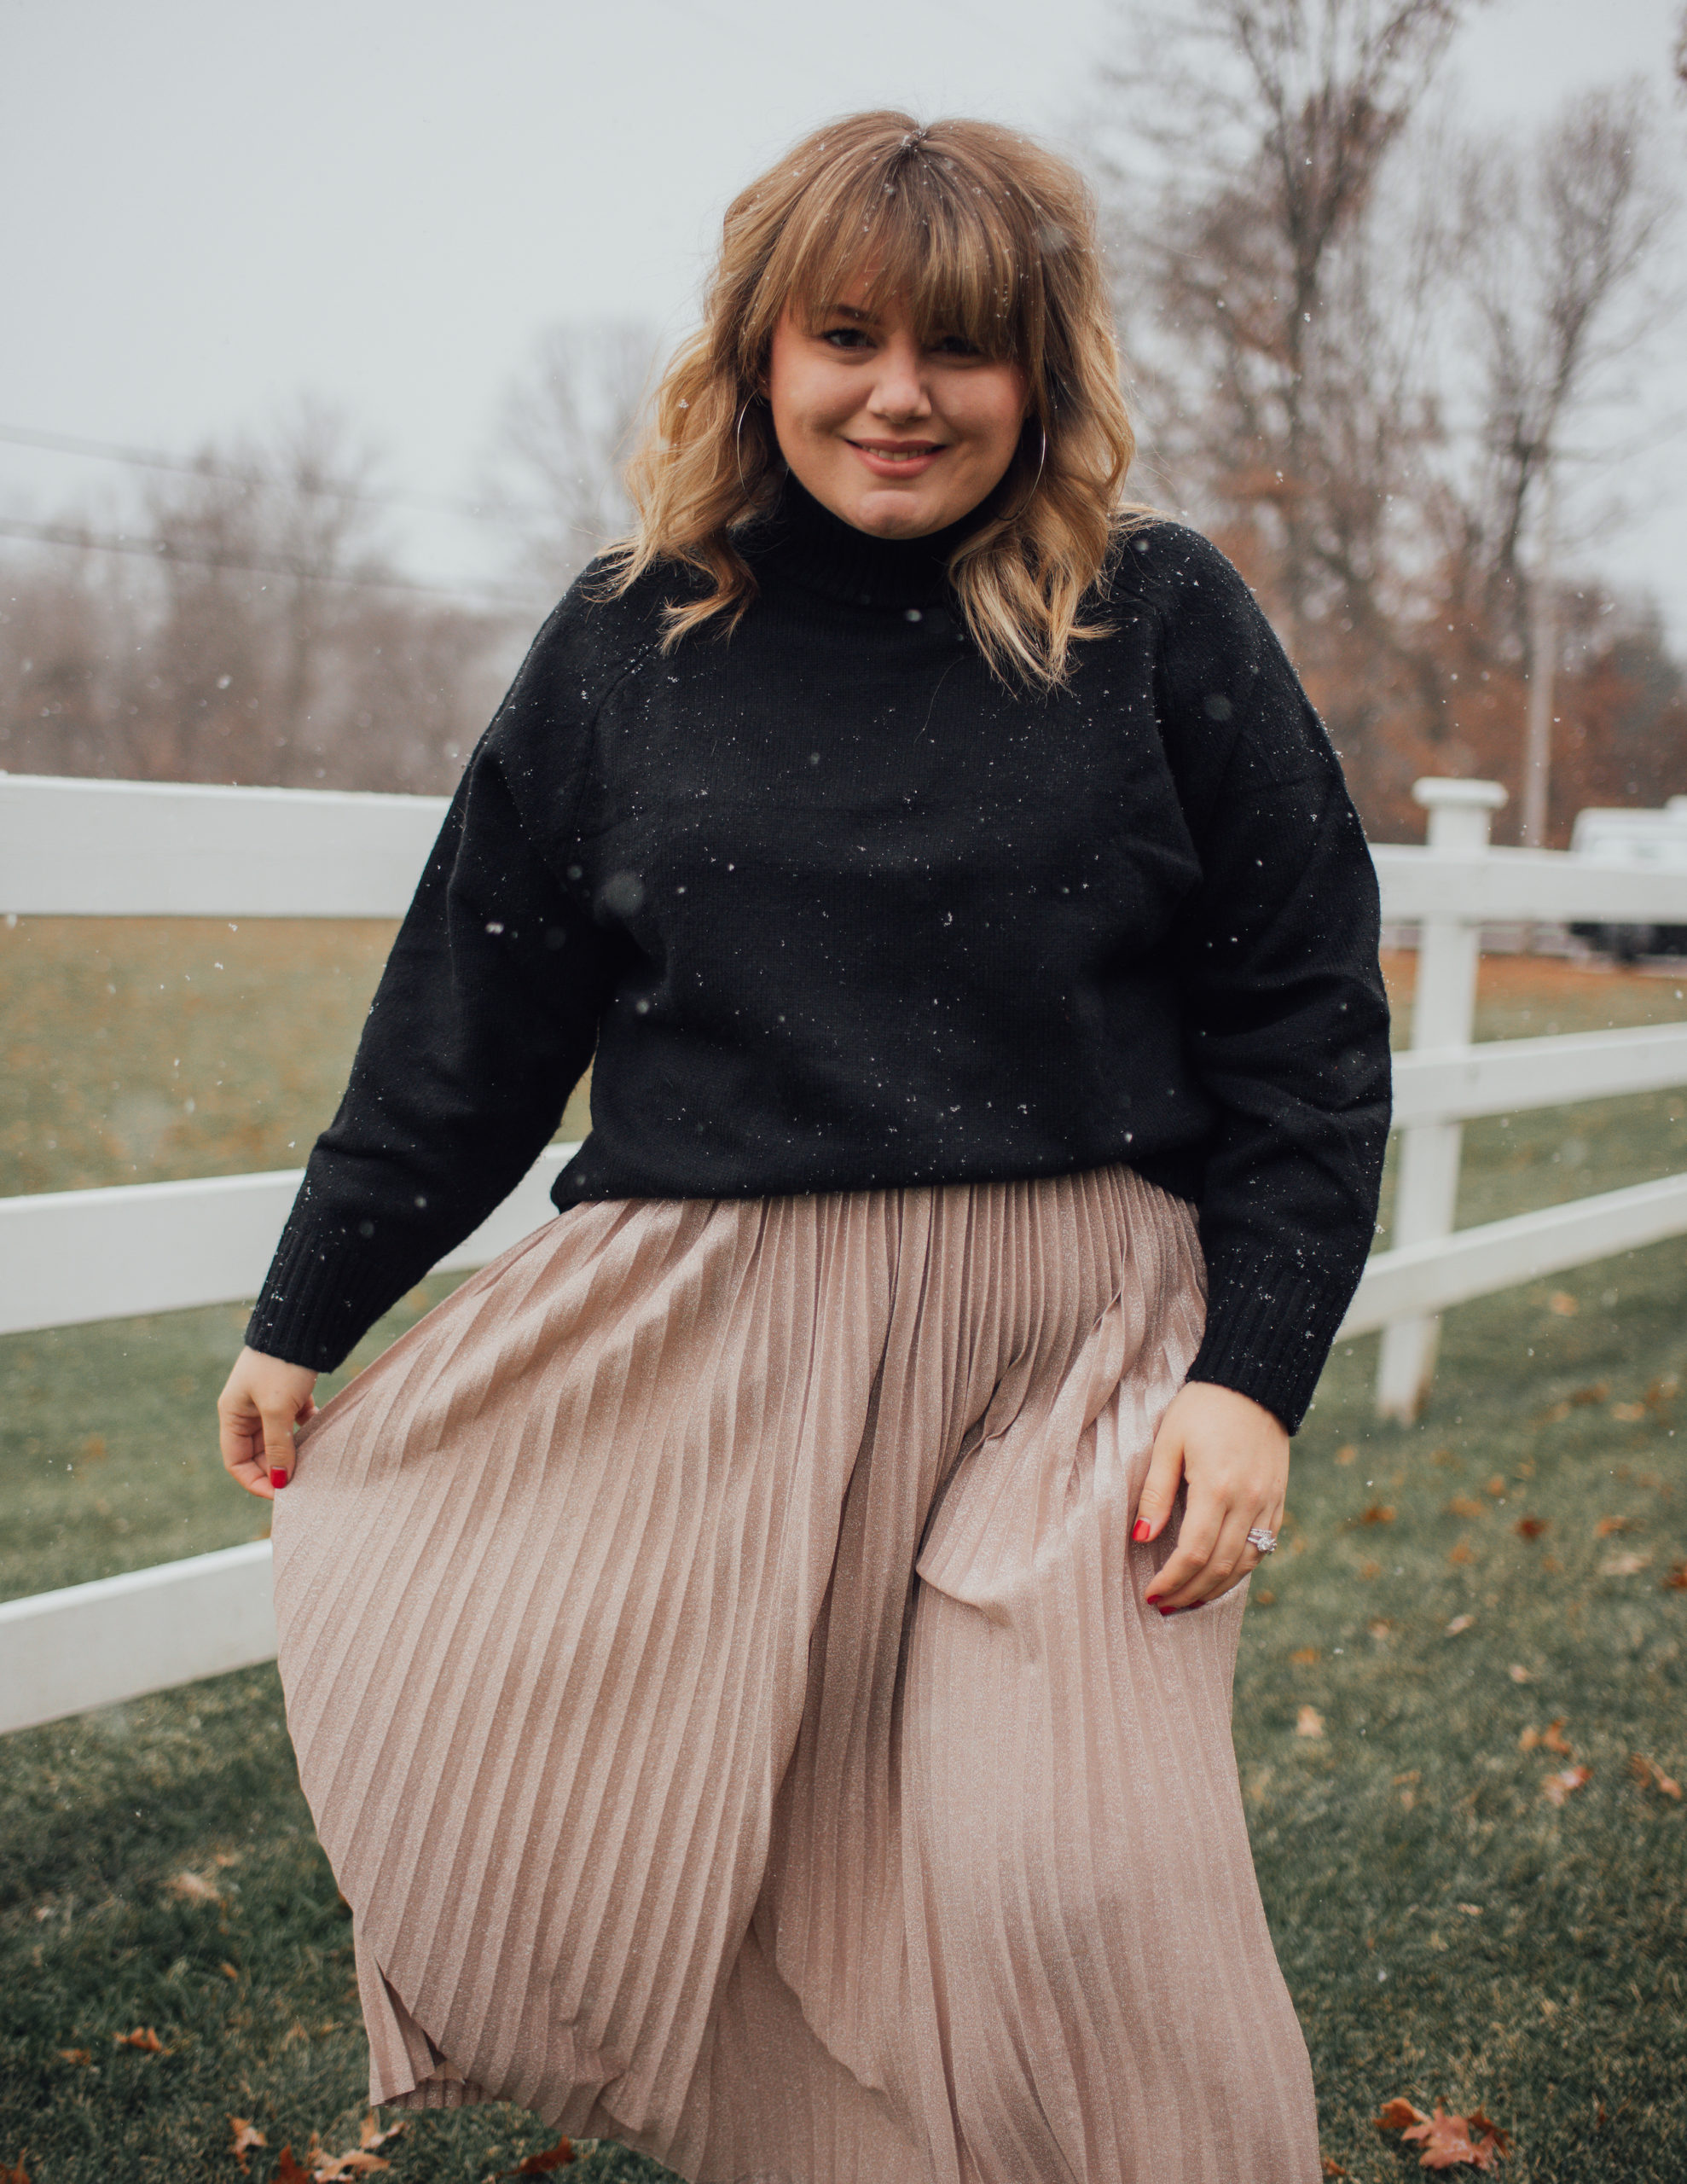 Sharing a chic holiday outfit in one of my favorite outfit formulas. The sweater and pleated skirt! I love how cozy and dressy this is! 